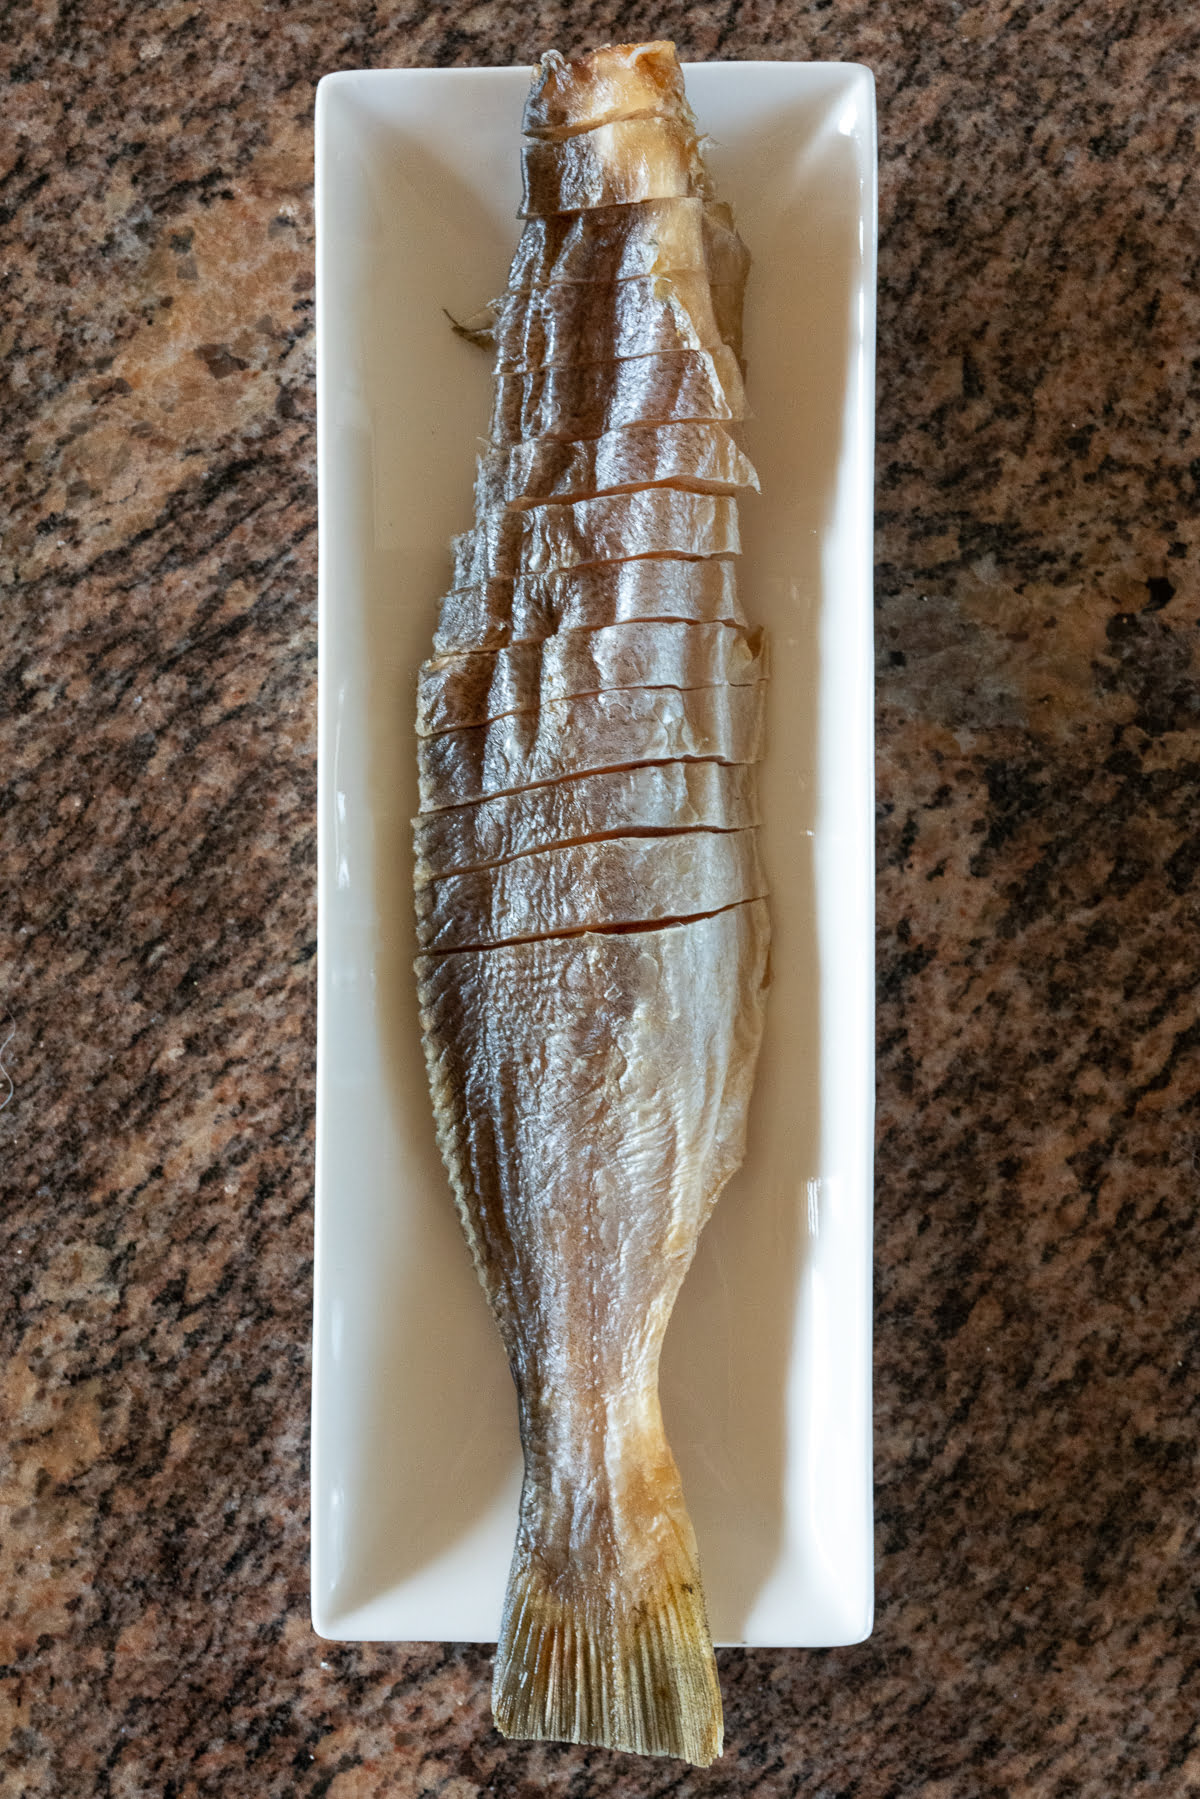 A whole dried salted fish